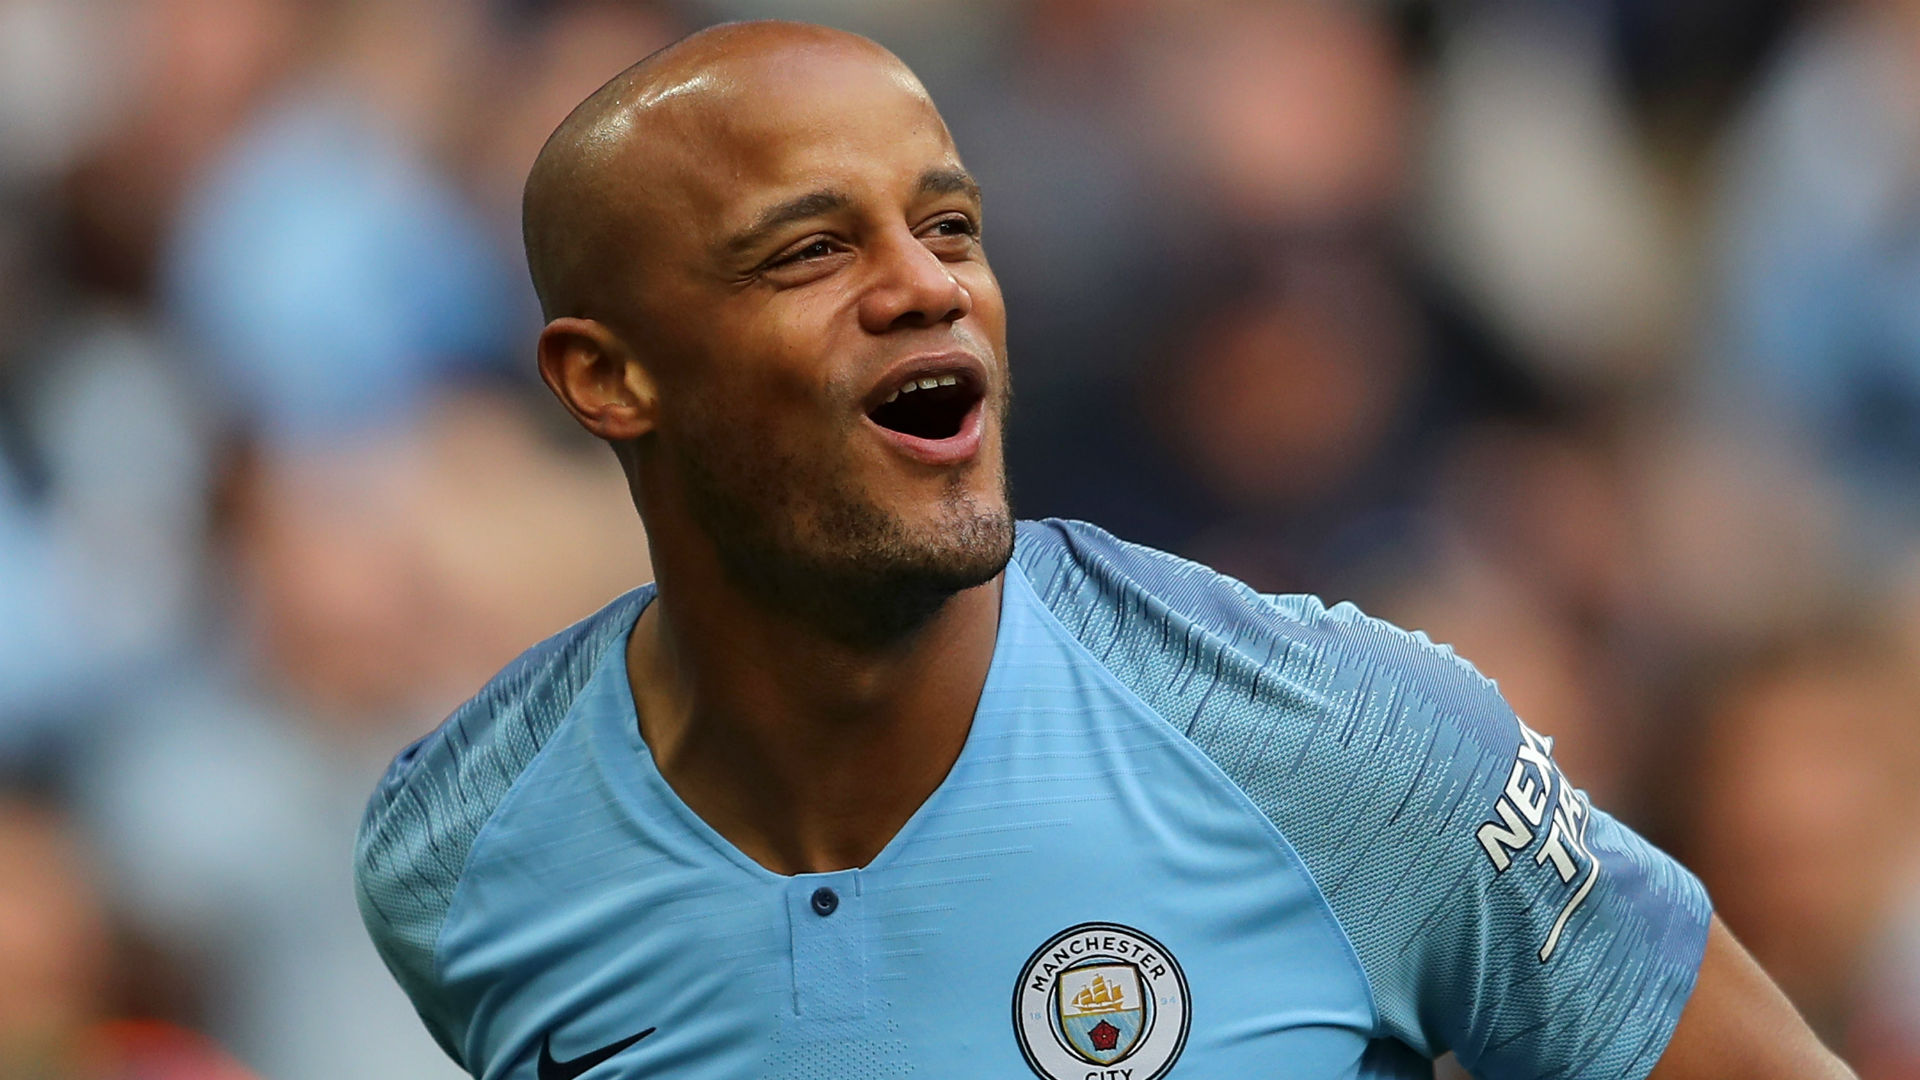 After leaving to become Anderlecht player-manager, Vincent Kompany will return to the Etihad Stadium for a Manchester City testimonial.